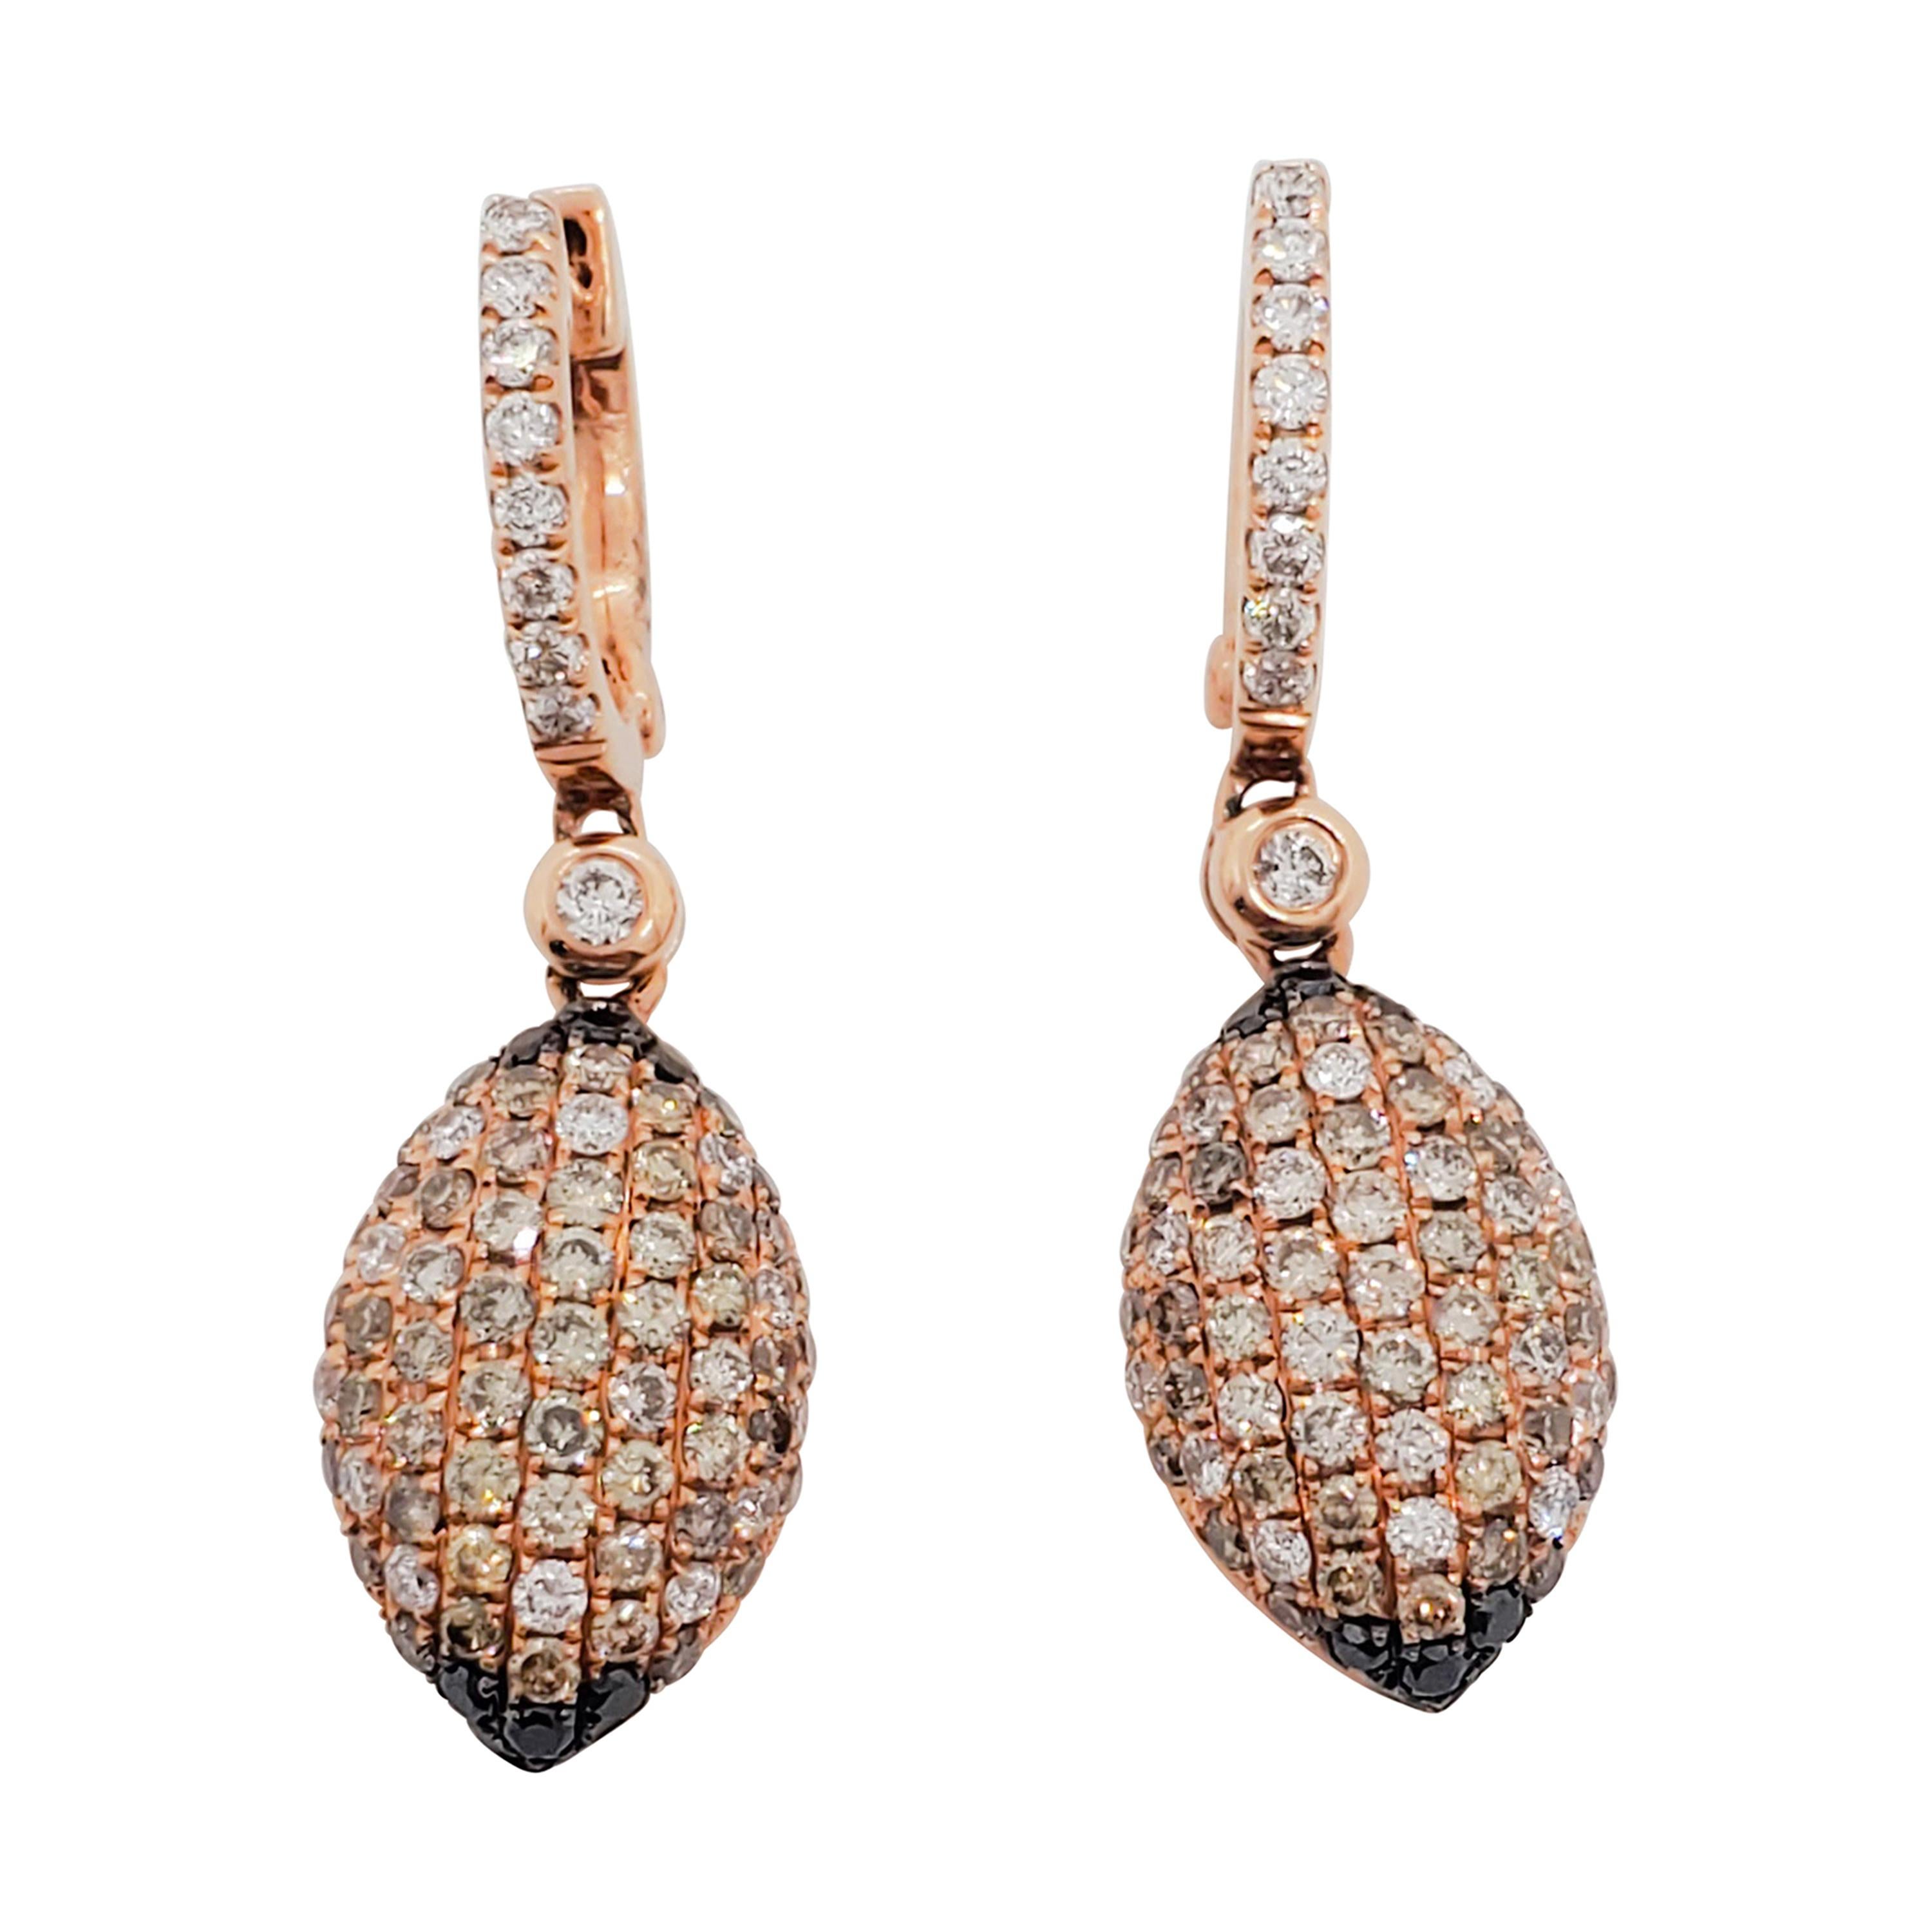  White and Black Diamond Pave Dangle Earrings in 14k Rose Gold